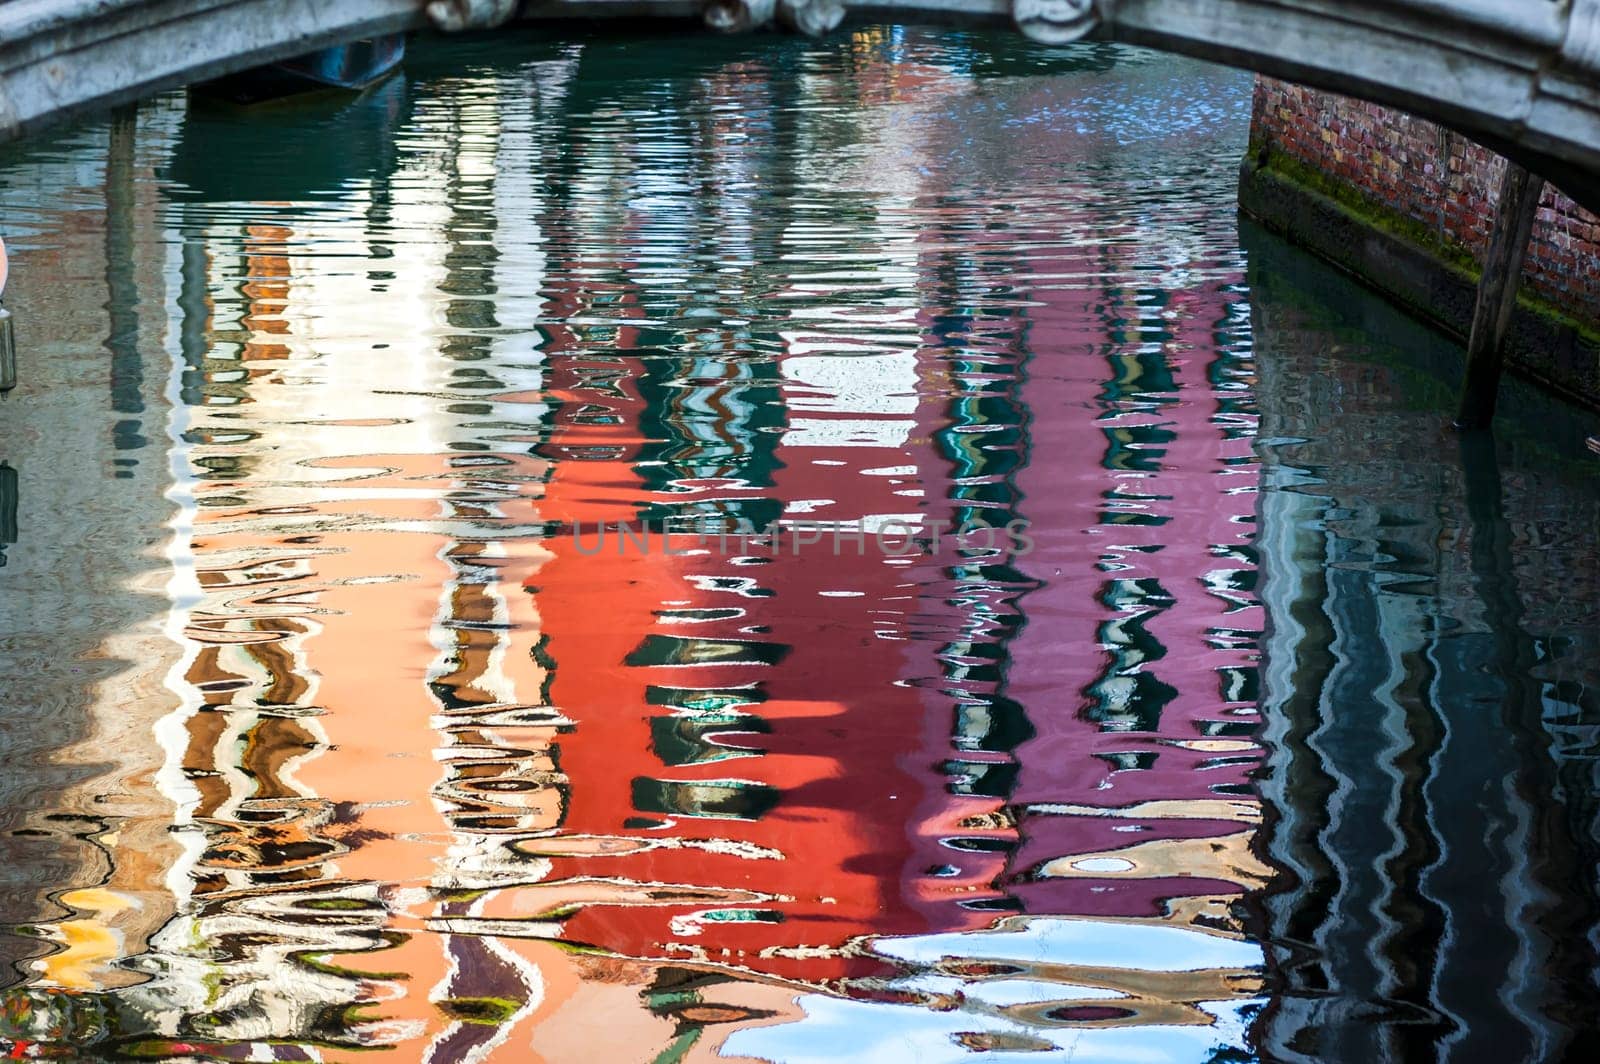 The colors of the buildings reflected on the water of one of the Venetian canals